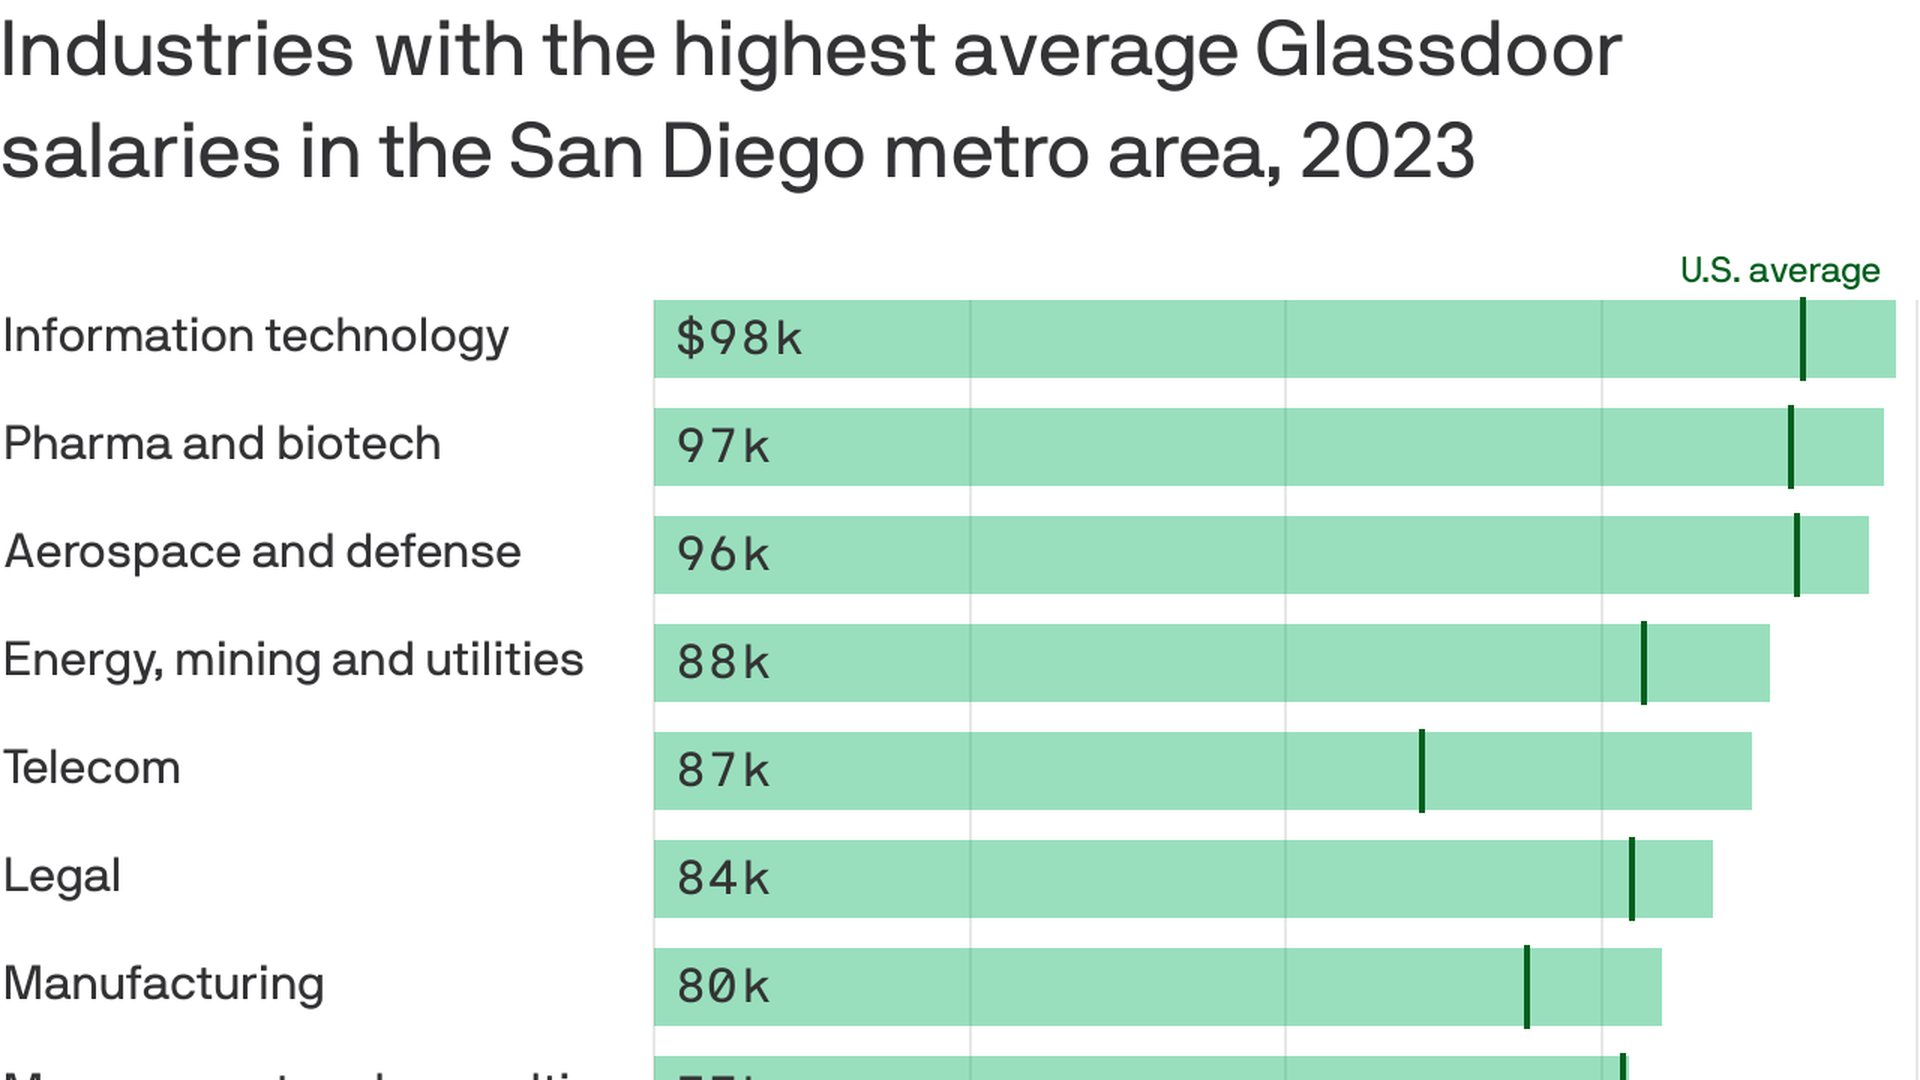 Industries with the highest average Glassdoor salaries in the San Diego metro area.